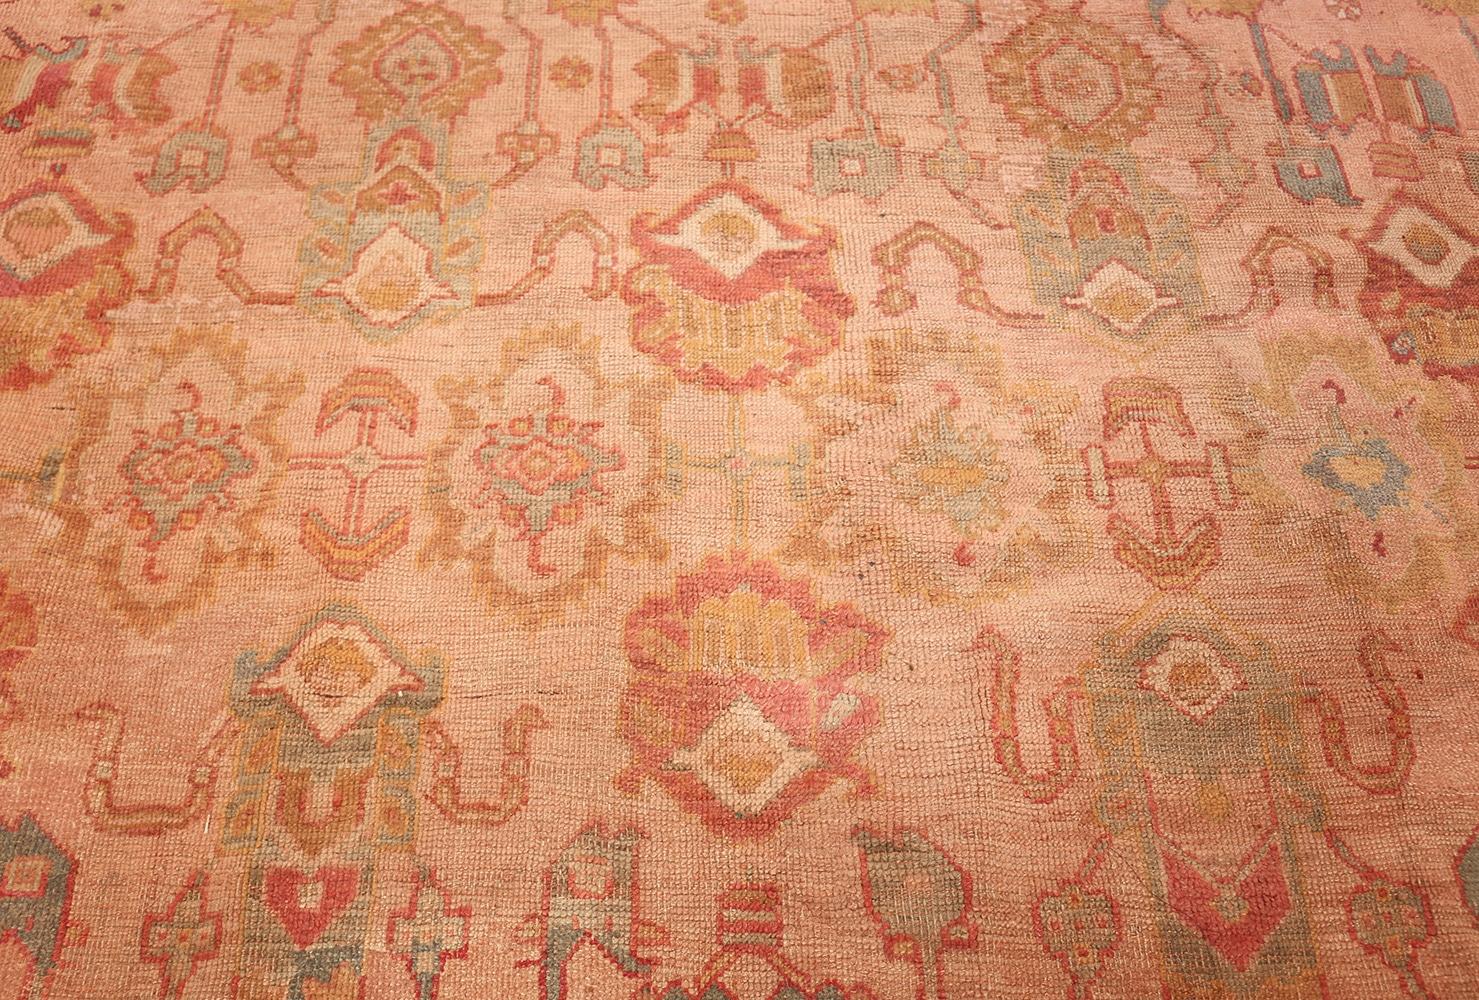 Antique Turkish Oushak rug, Turkey, C turn of the 20th century - Size: 14 ft 7 in x 17 ft 6 in (4.44 m x 5.33 m).